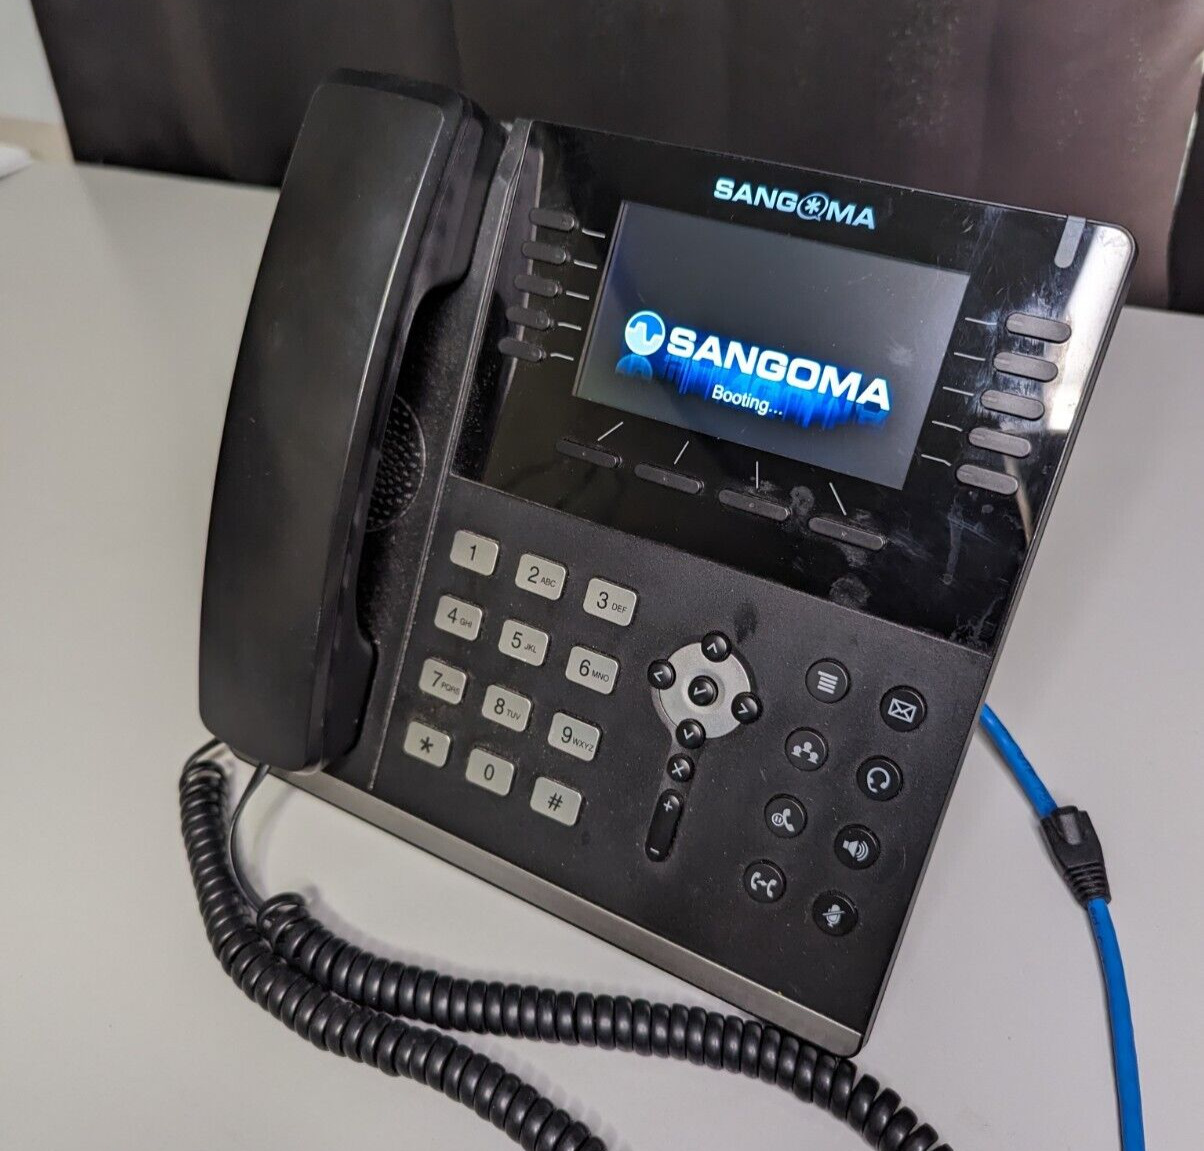 Sangoma s705 IP Phone With Wi-Fi & Bluetooth Support P/N: PHON-S705